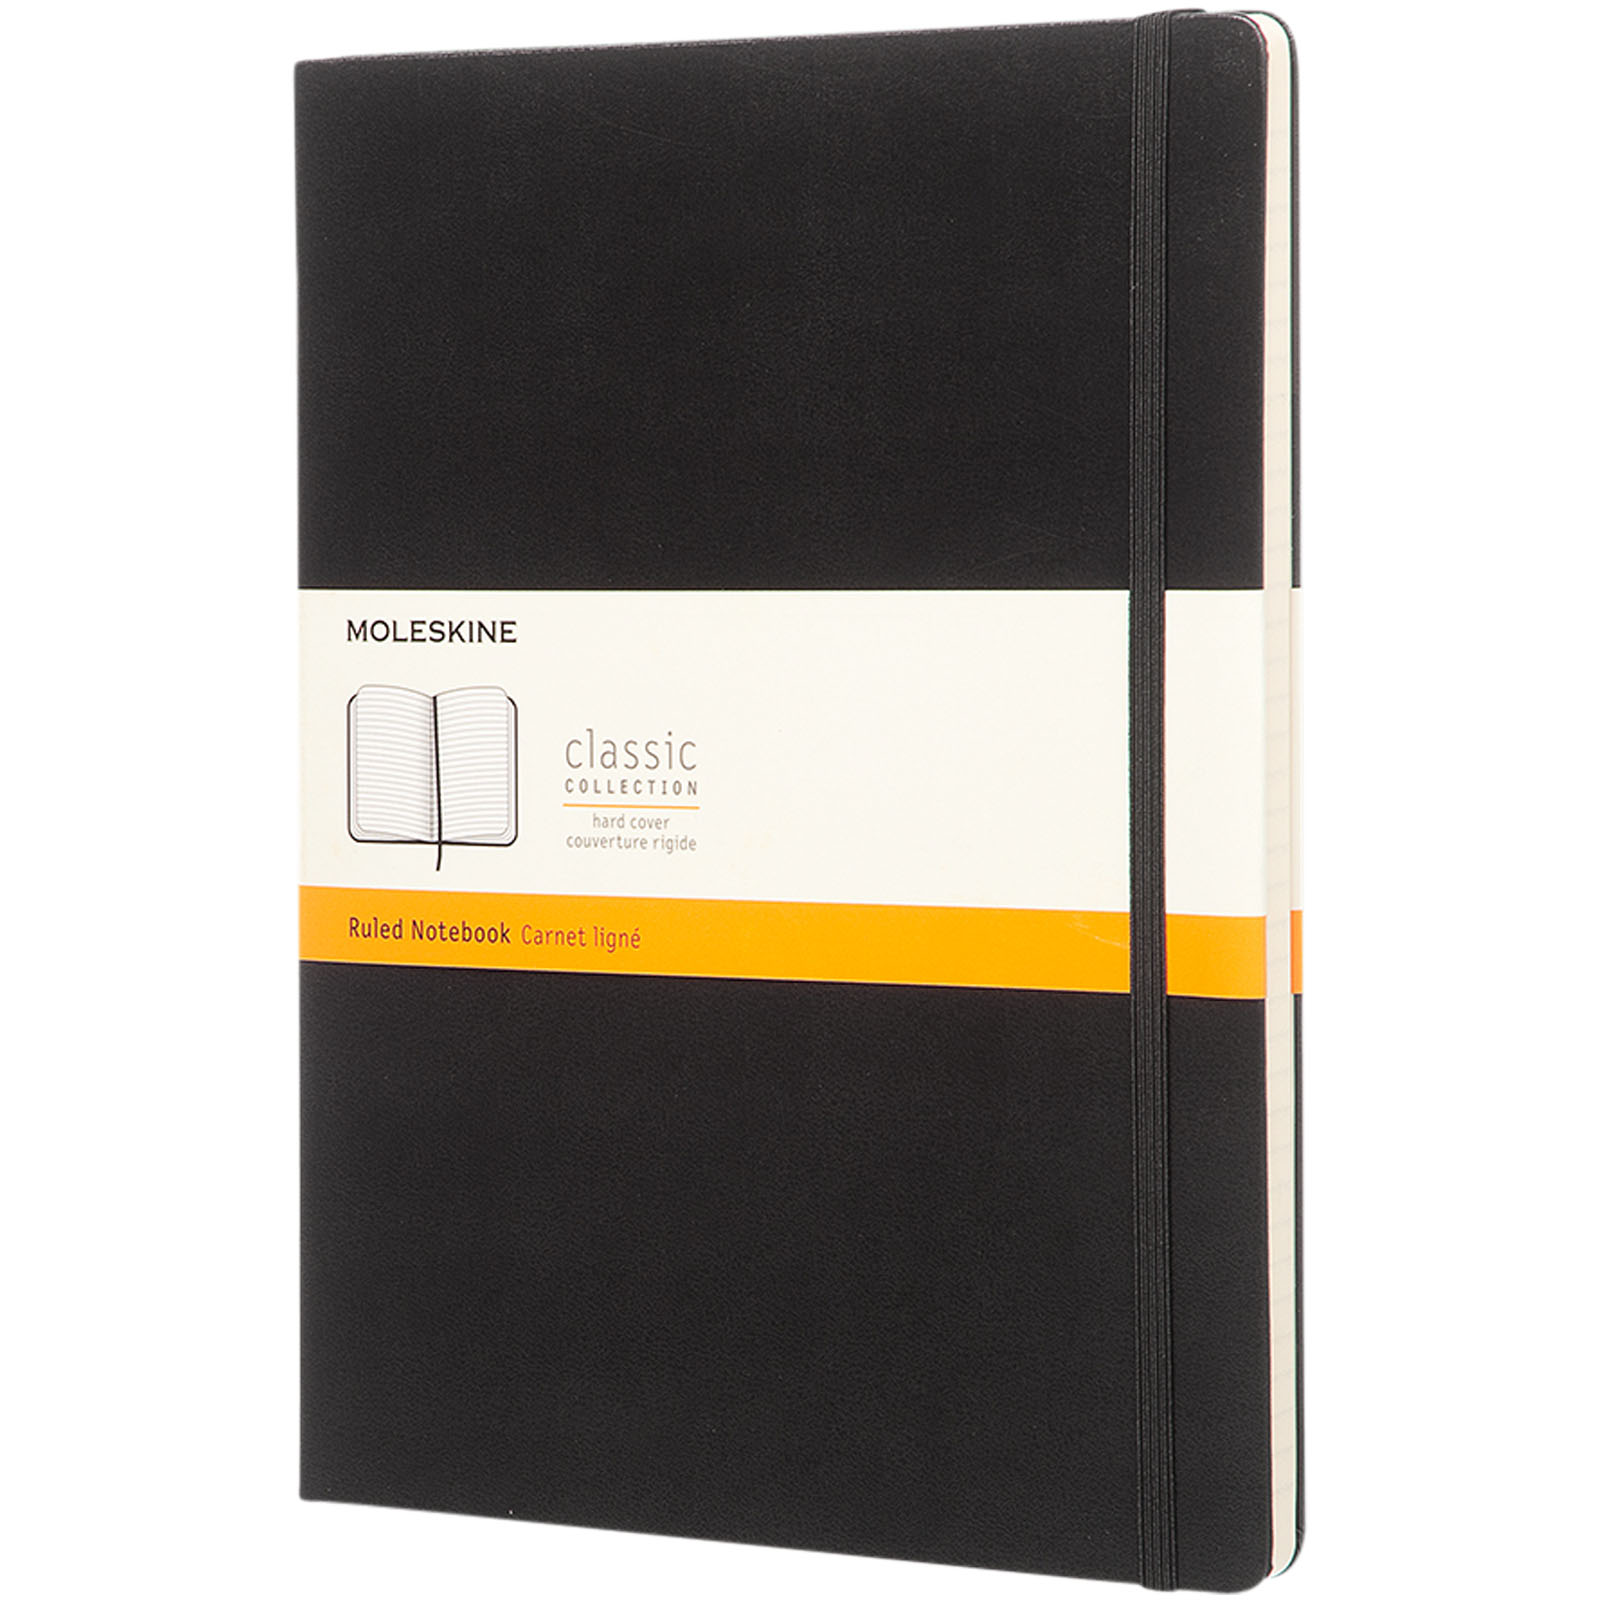 Extra large classic notebook - Lower Slaughter - Orpington